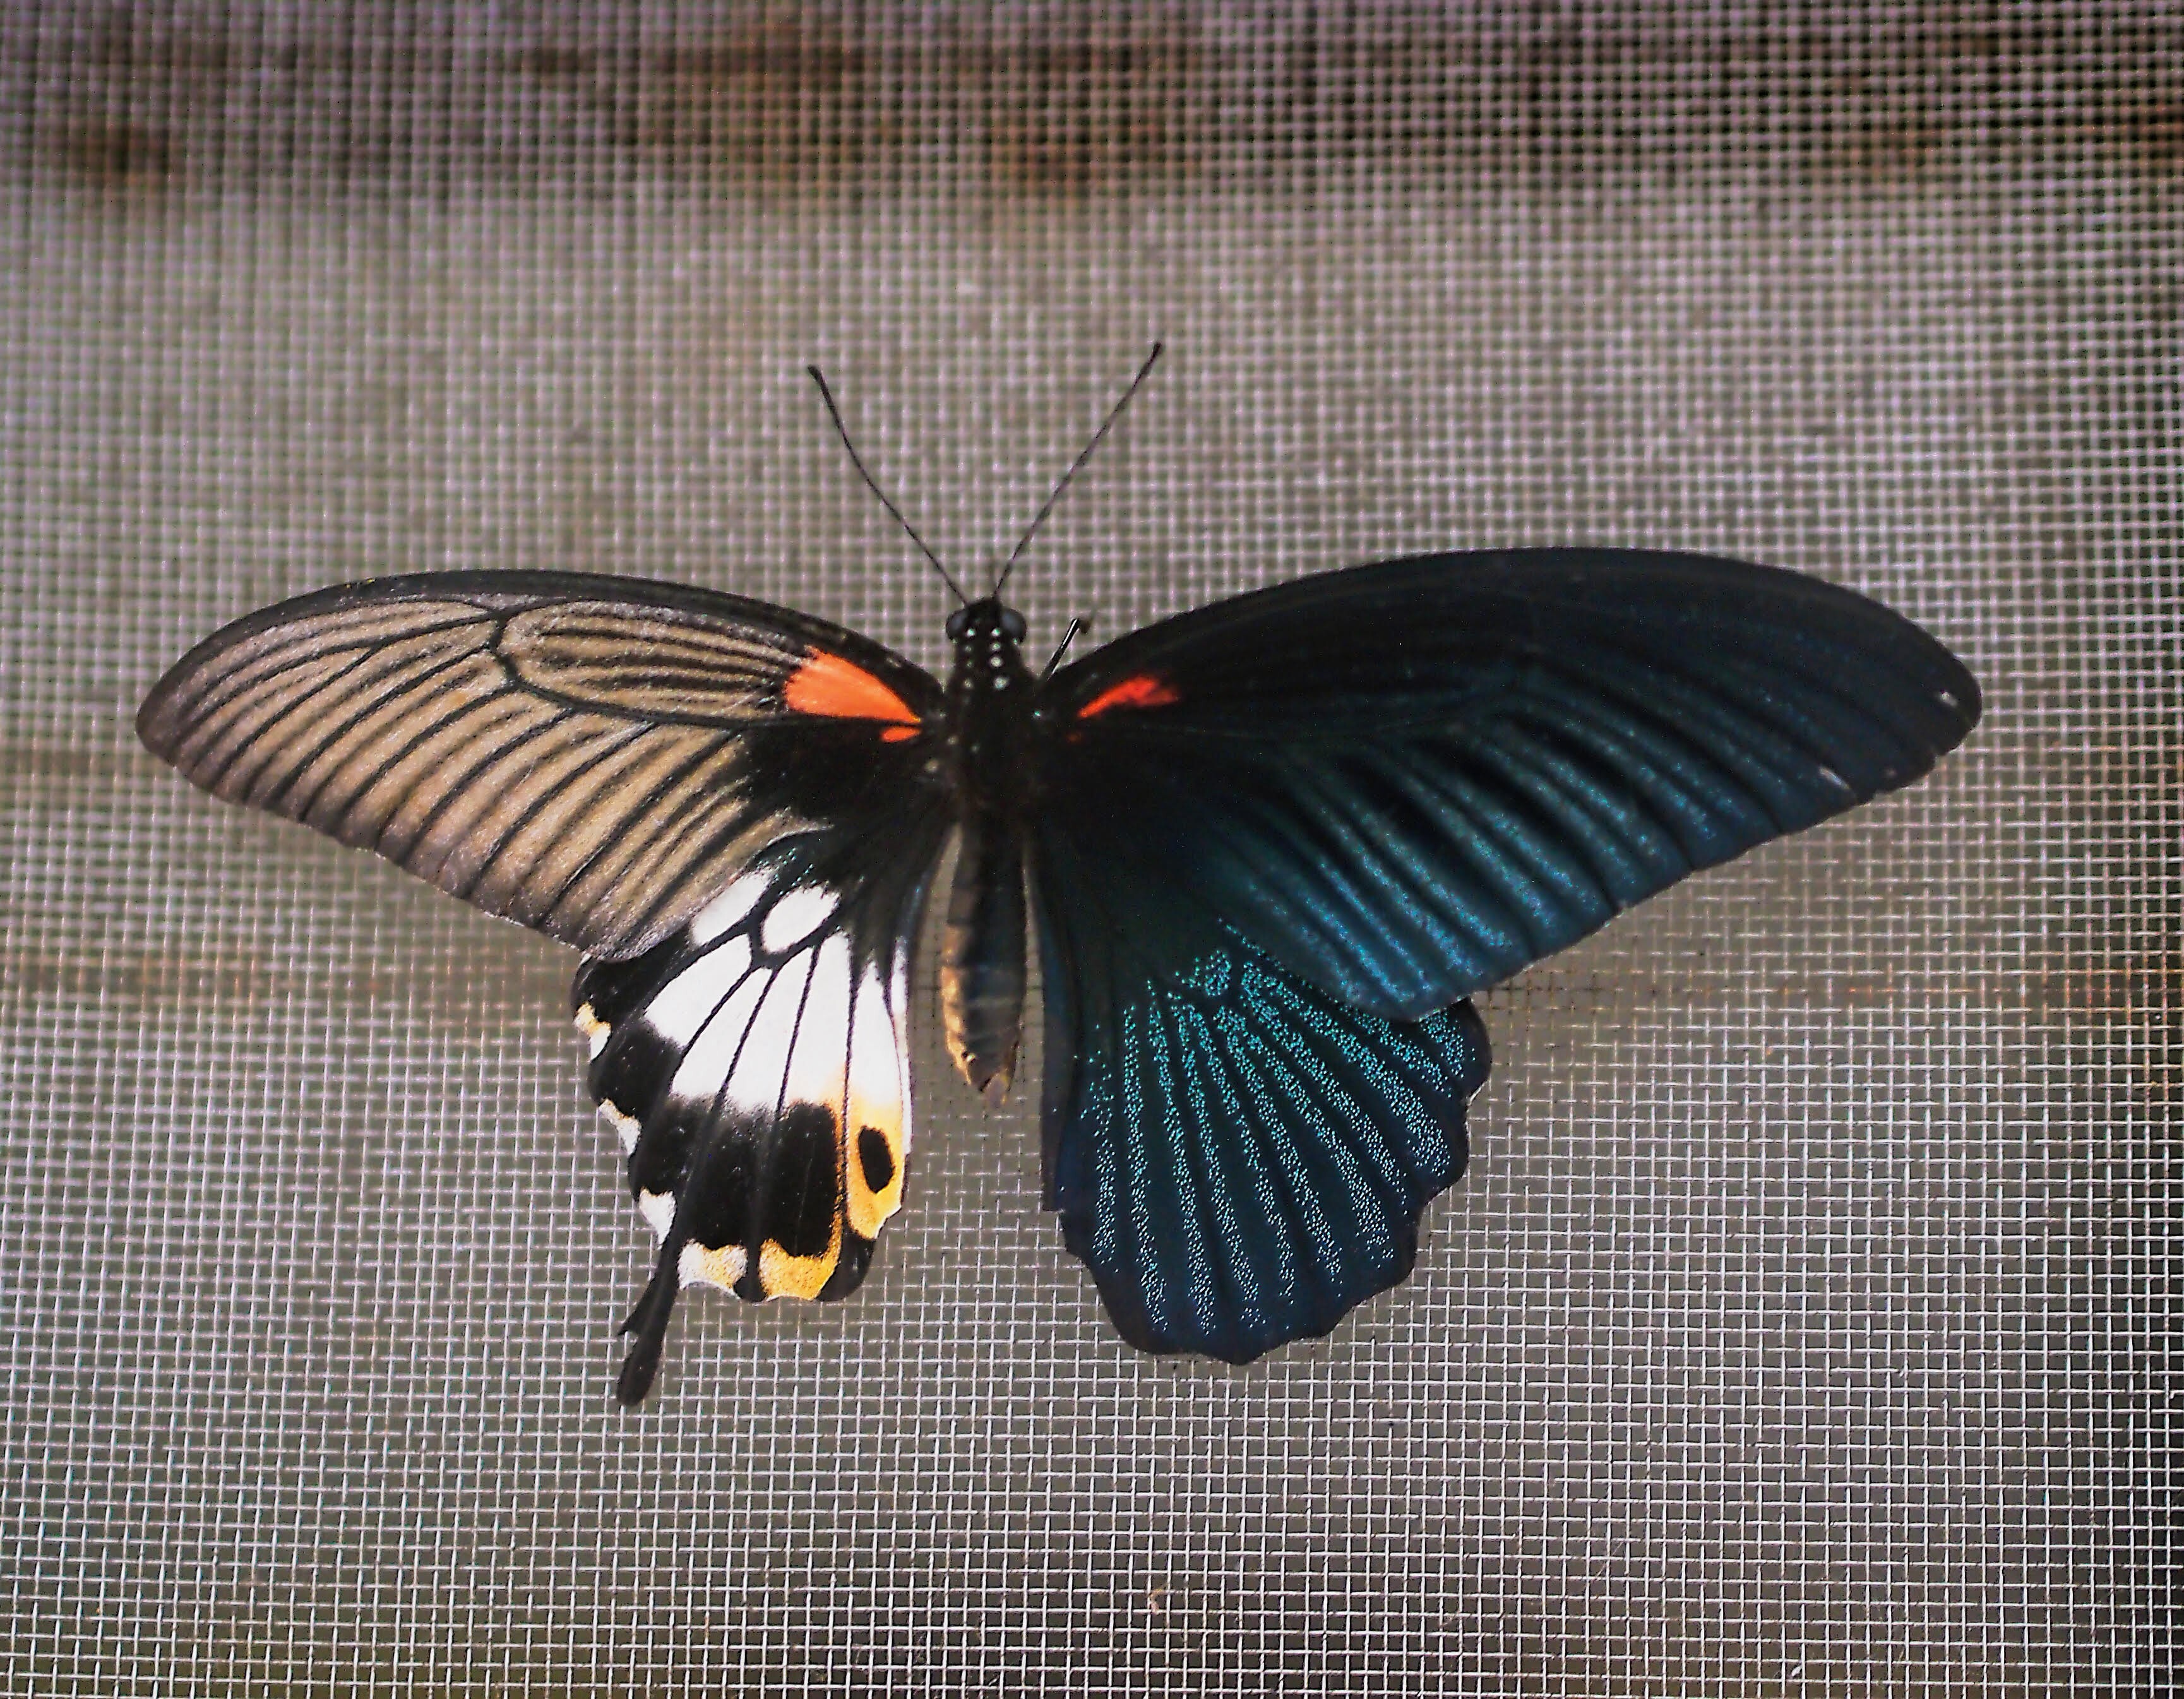 A rare bisexual great Mormon butterfly, seen in Hong Kong. Photo: Martin Williams